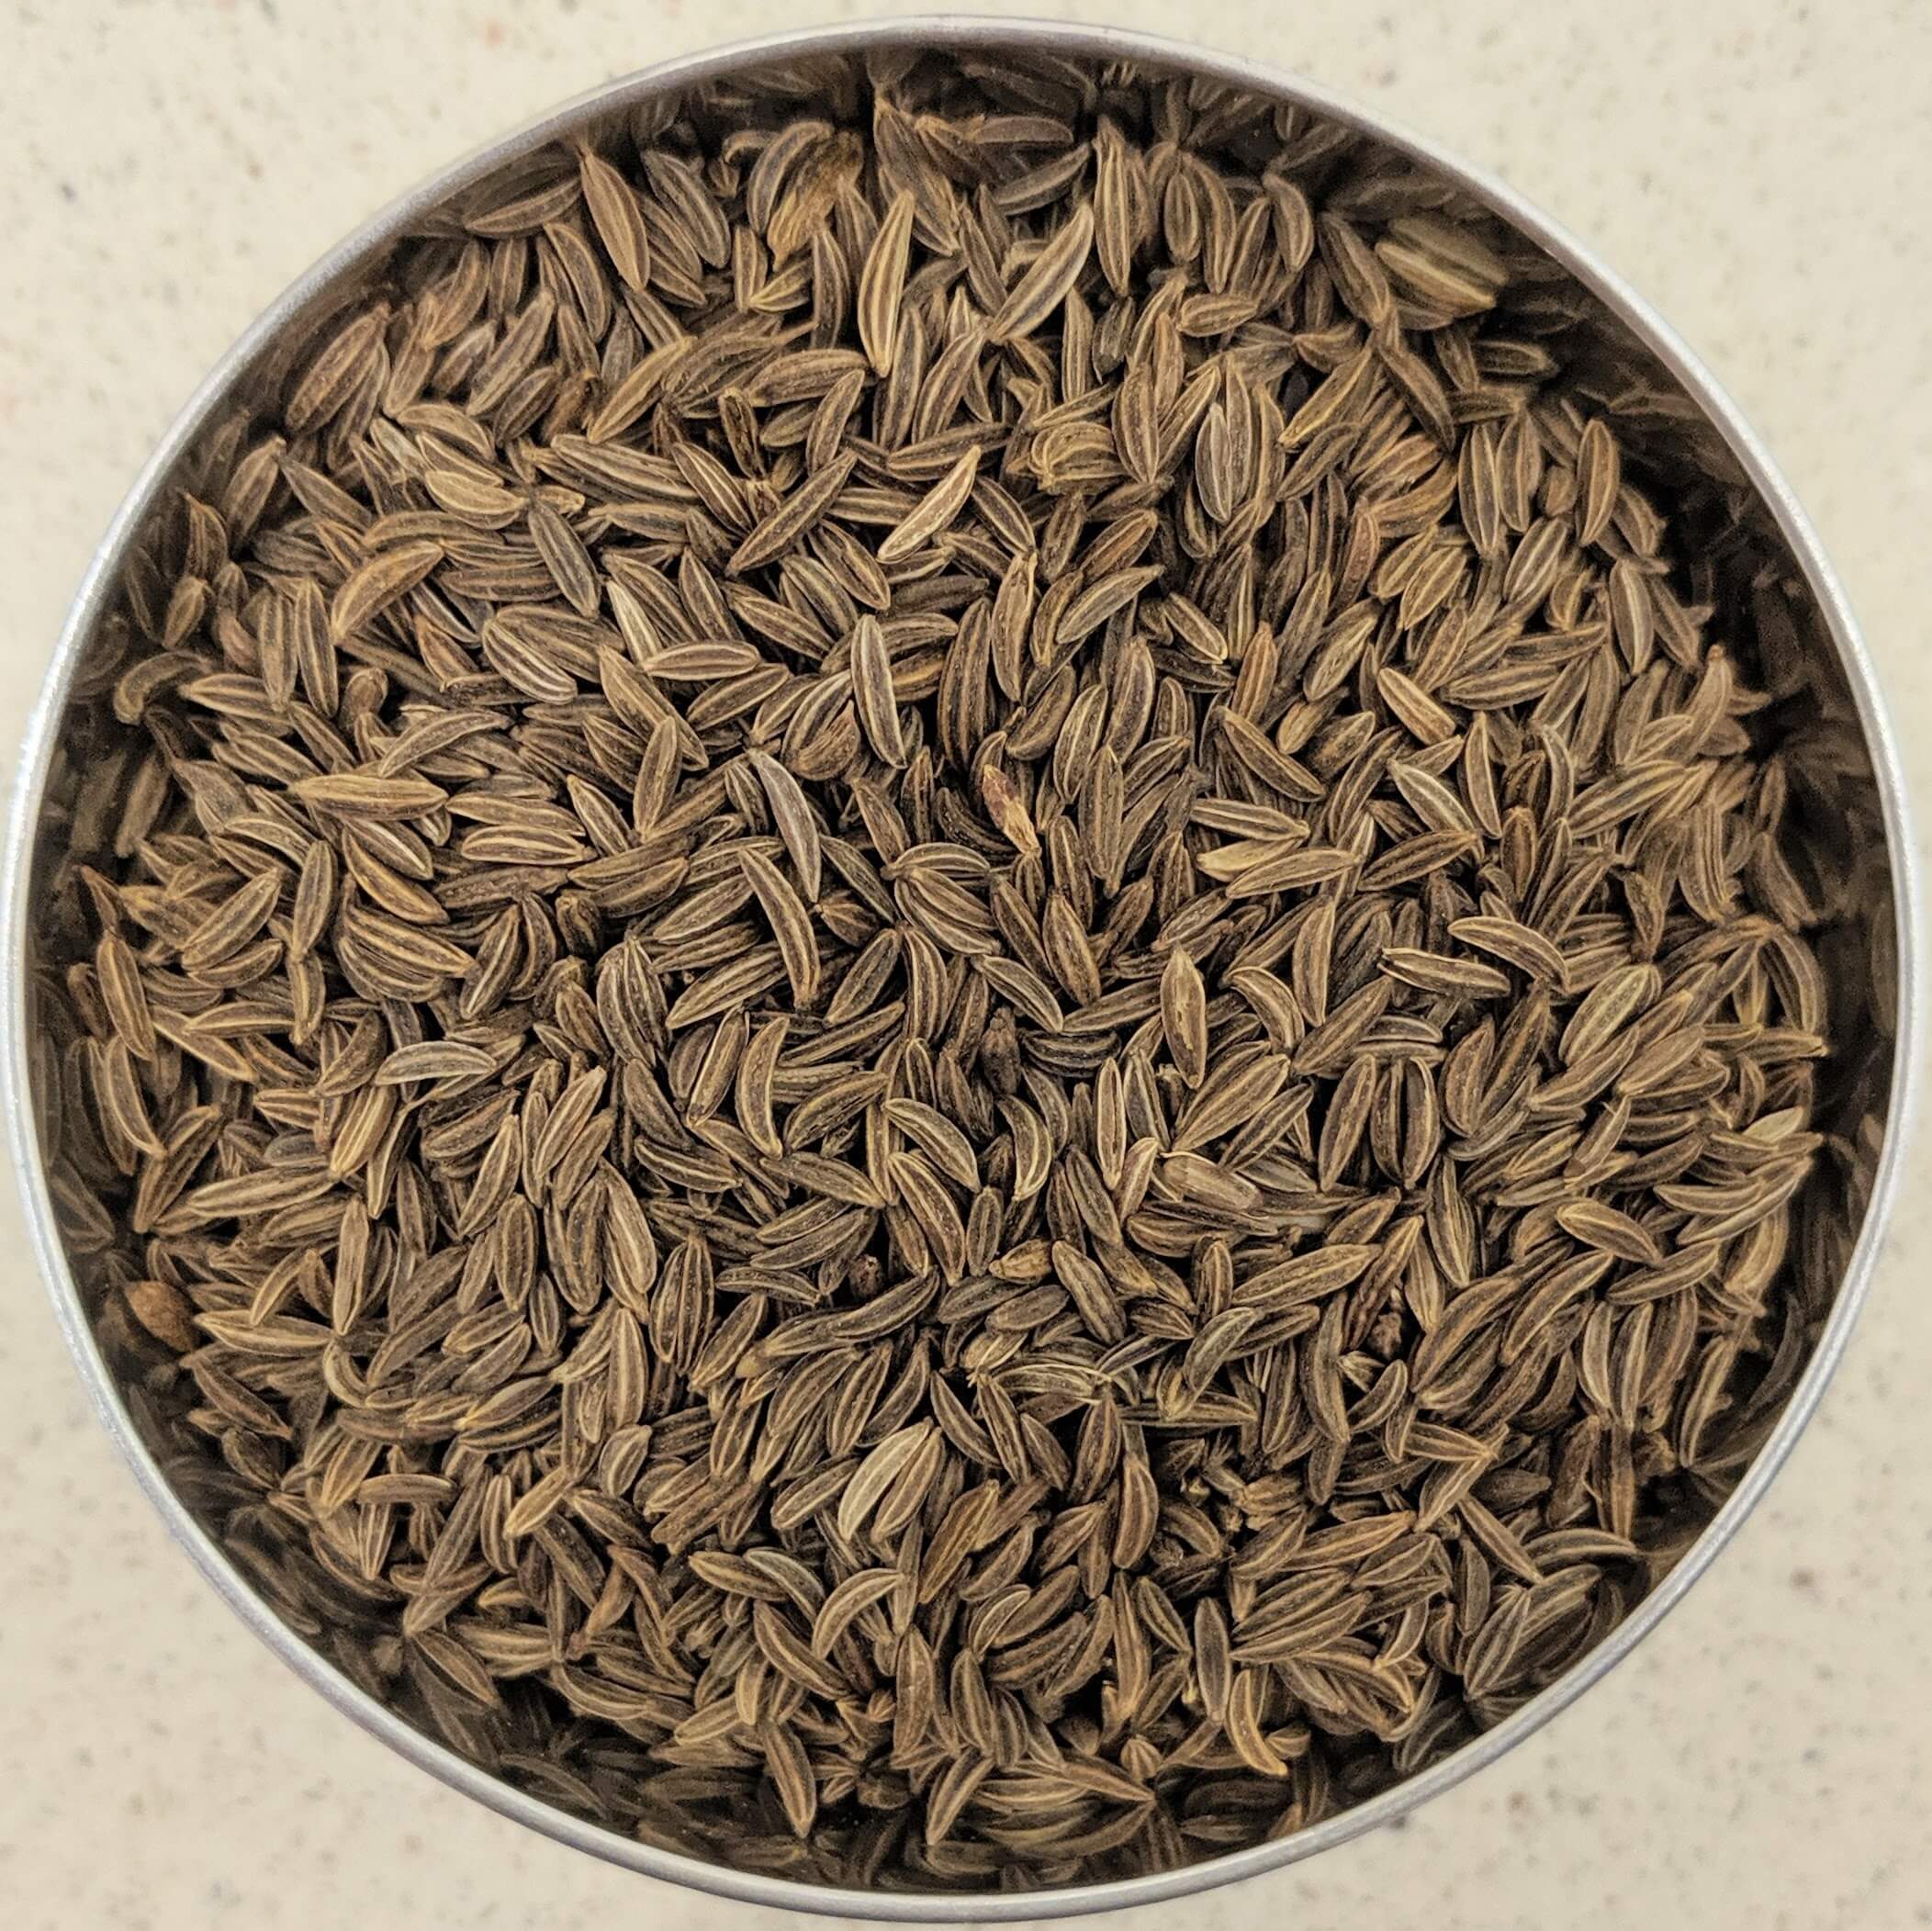 The Basic Principles Of How Much Cumin Seeds For Weight Loss 